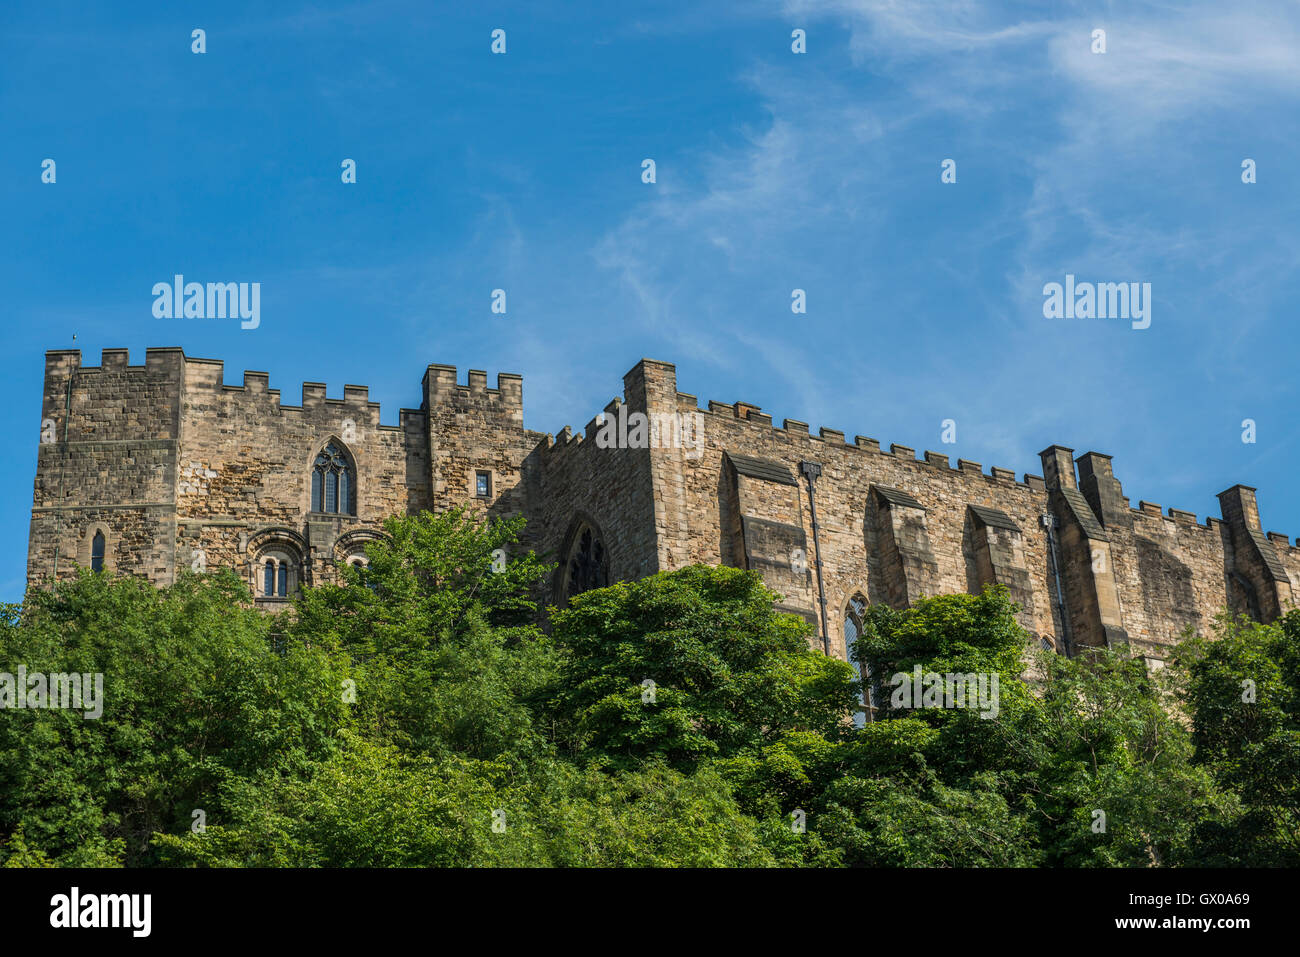 View of Durham Castle from Framwellgate Bridge on the River Wear, in the city of Durham, England, UK Stock Photo